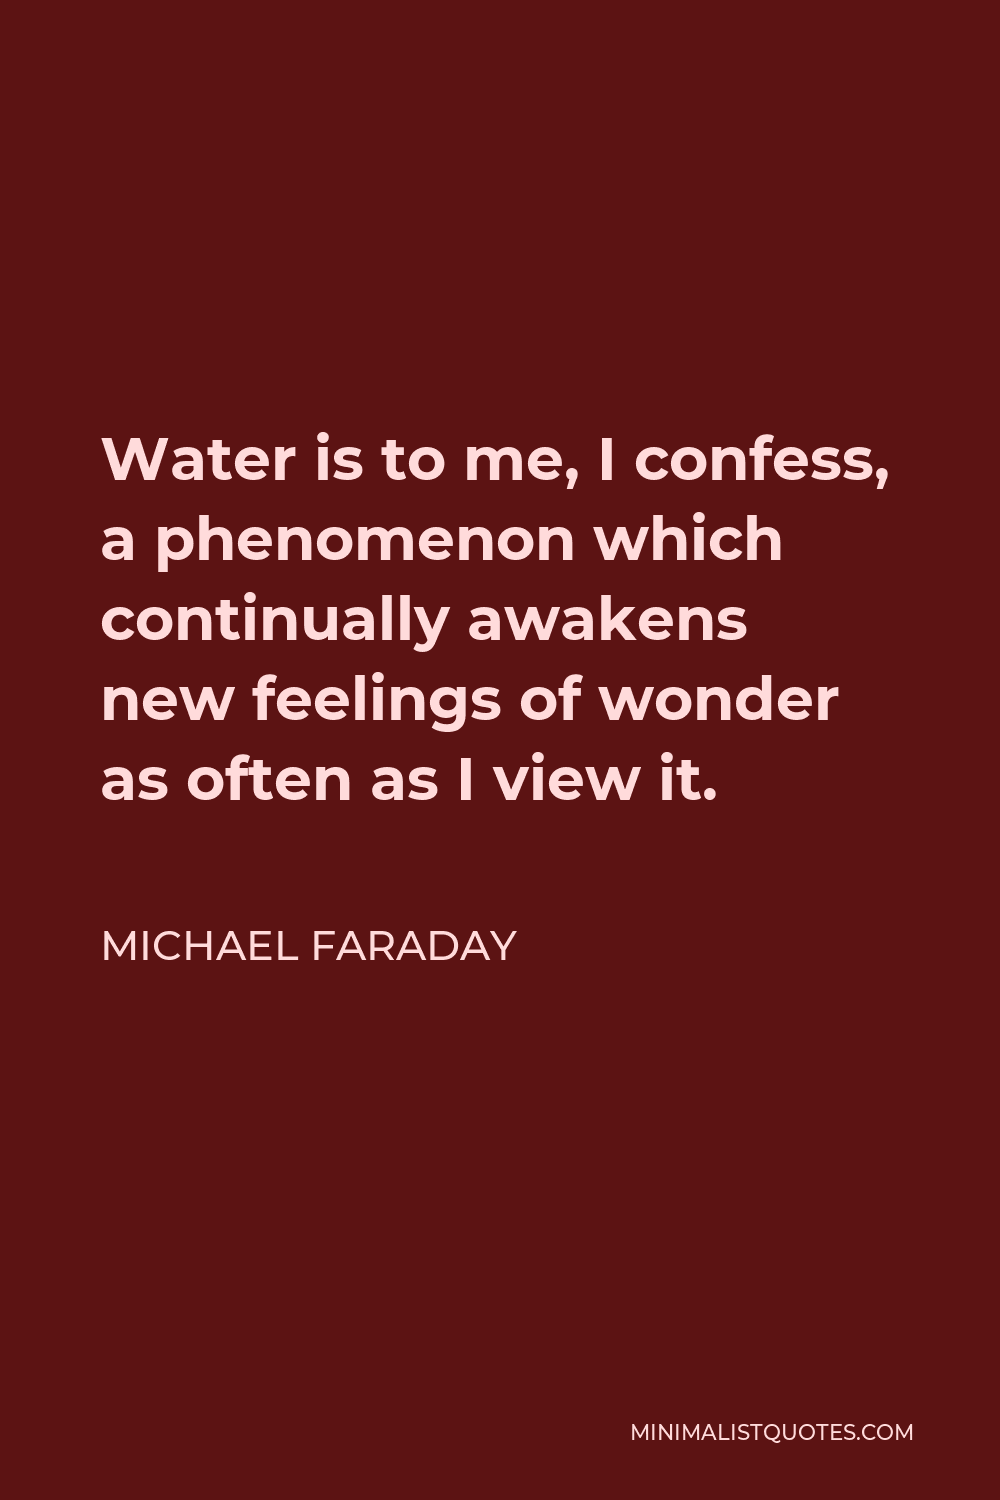 Michael Faraday Quote - Water is to me, I confess, a phenomenon which continually awakens new feelings of wonder as often as I view it.